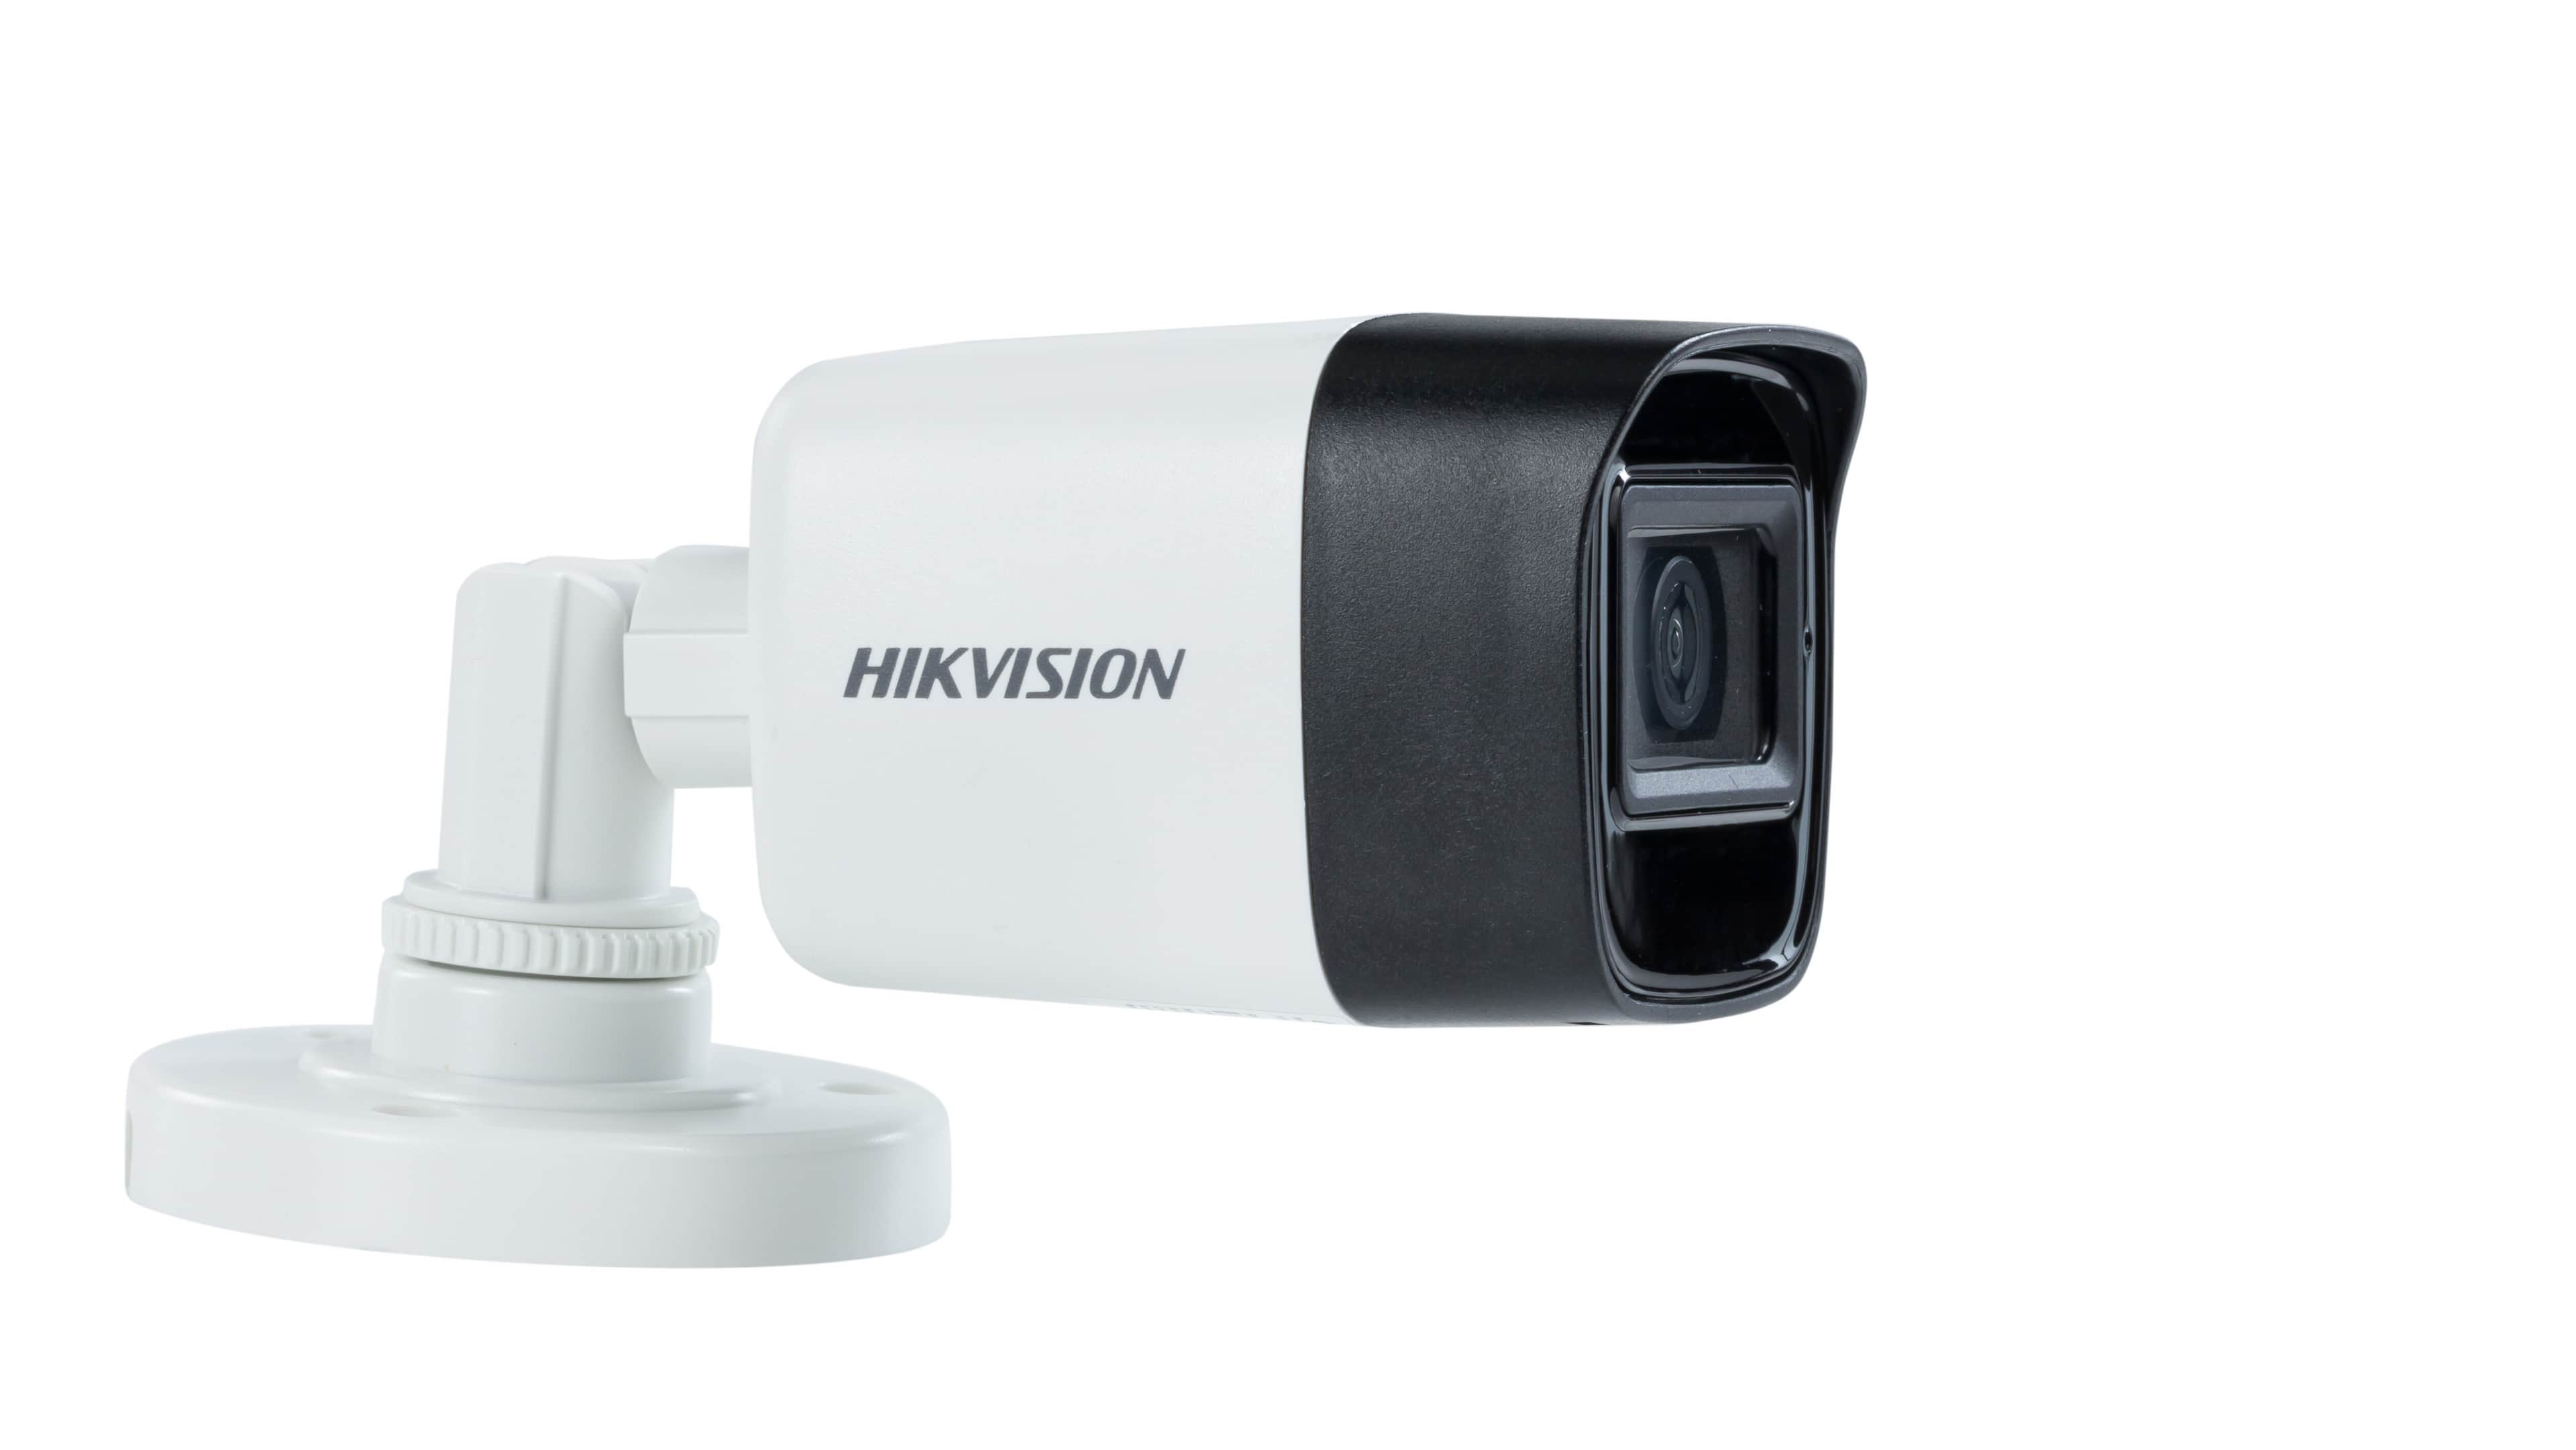 Hikvision-5MP-Audio-Fixed-Mini-Bullet-Camera-DS-2CE16H0T-ITPFS